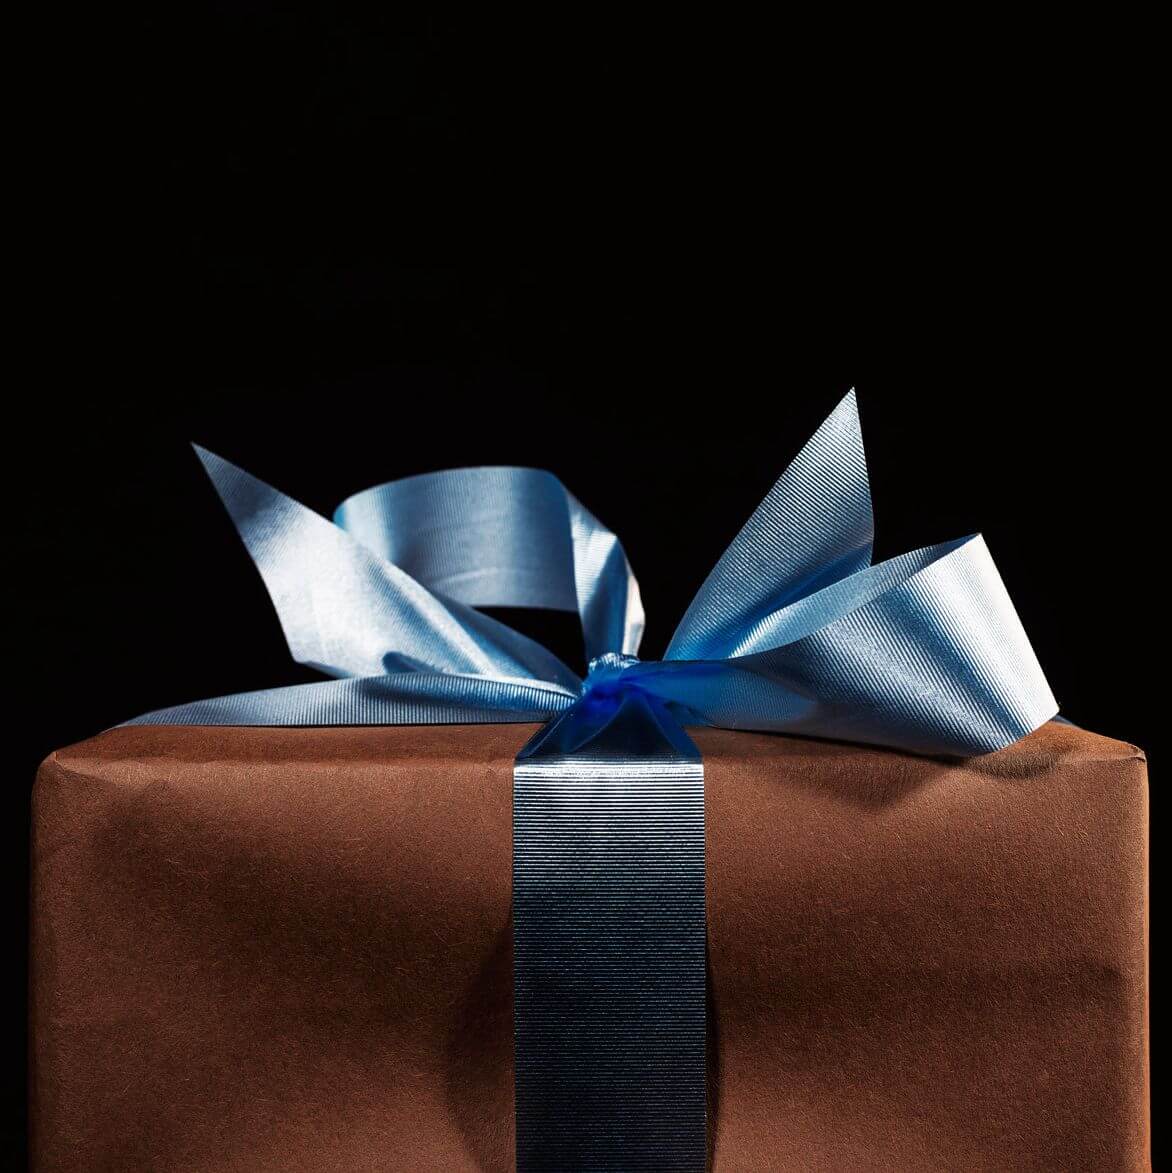 A Christmas or birthday present with brown wrapping paper and a blue ribbon